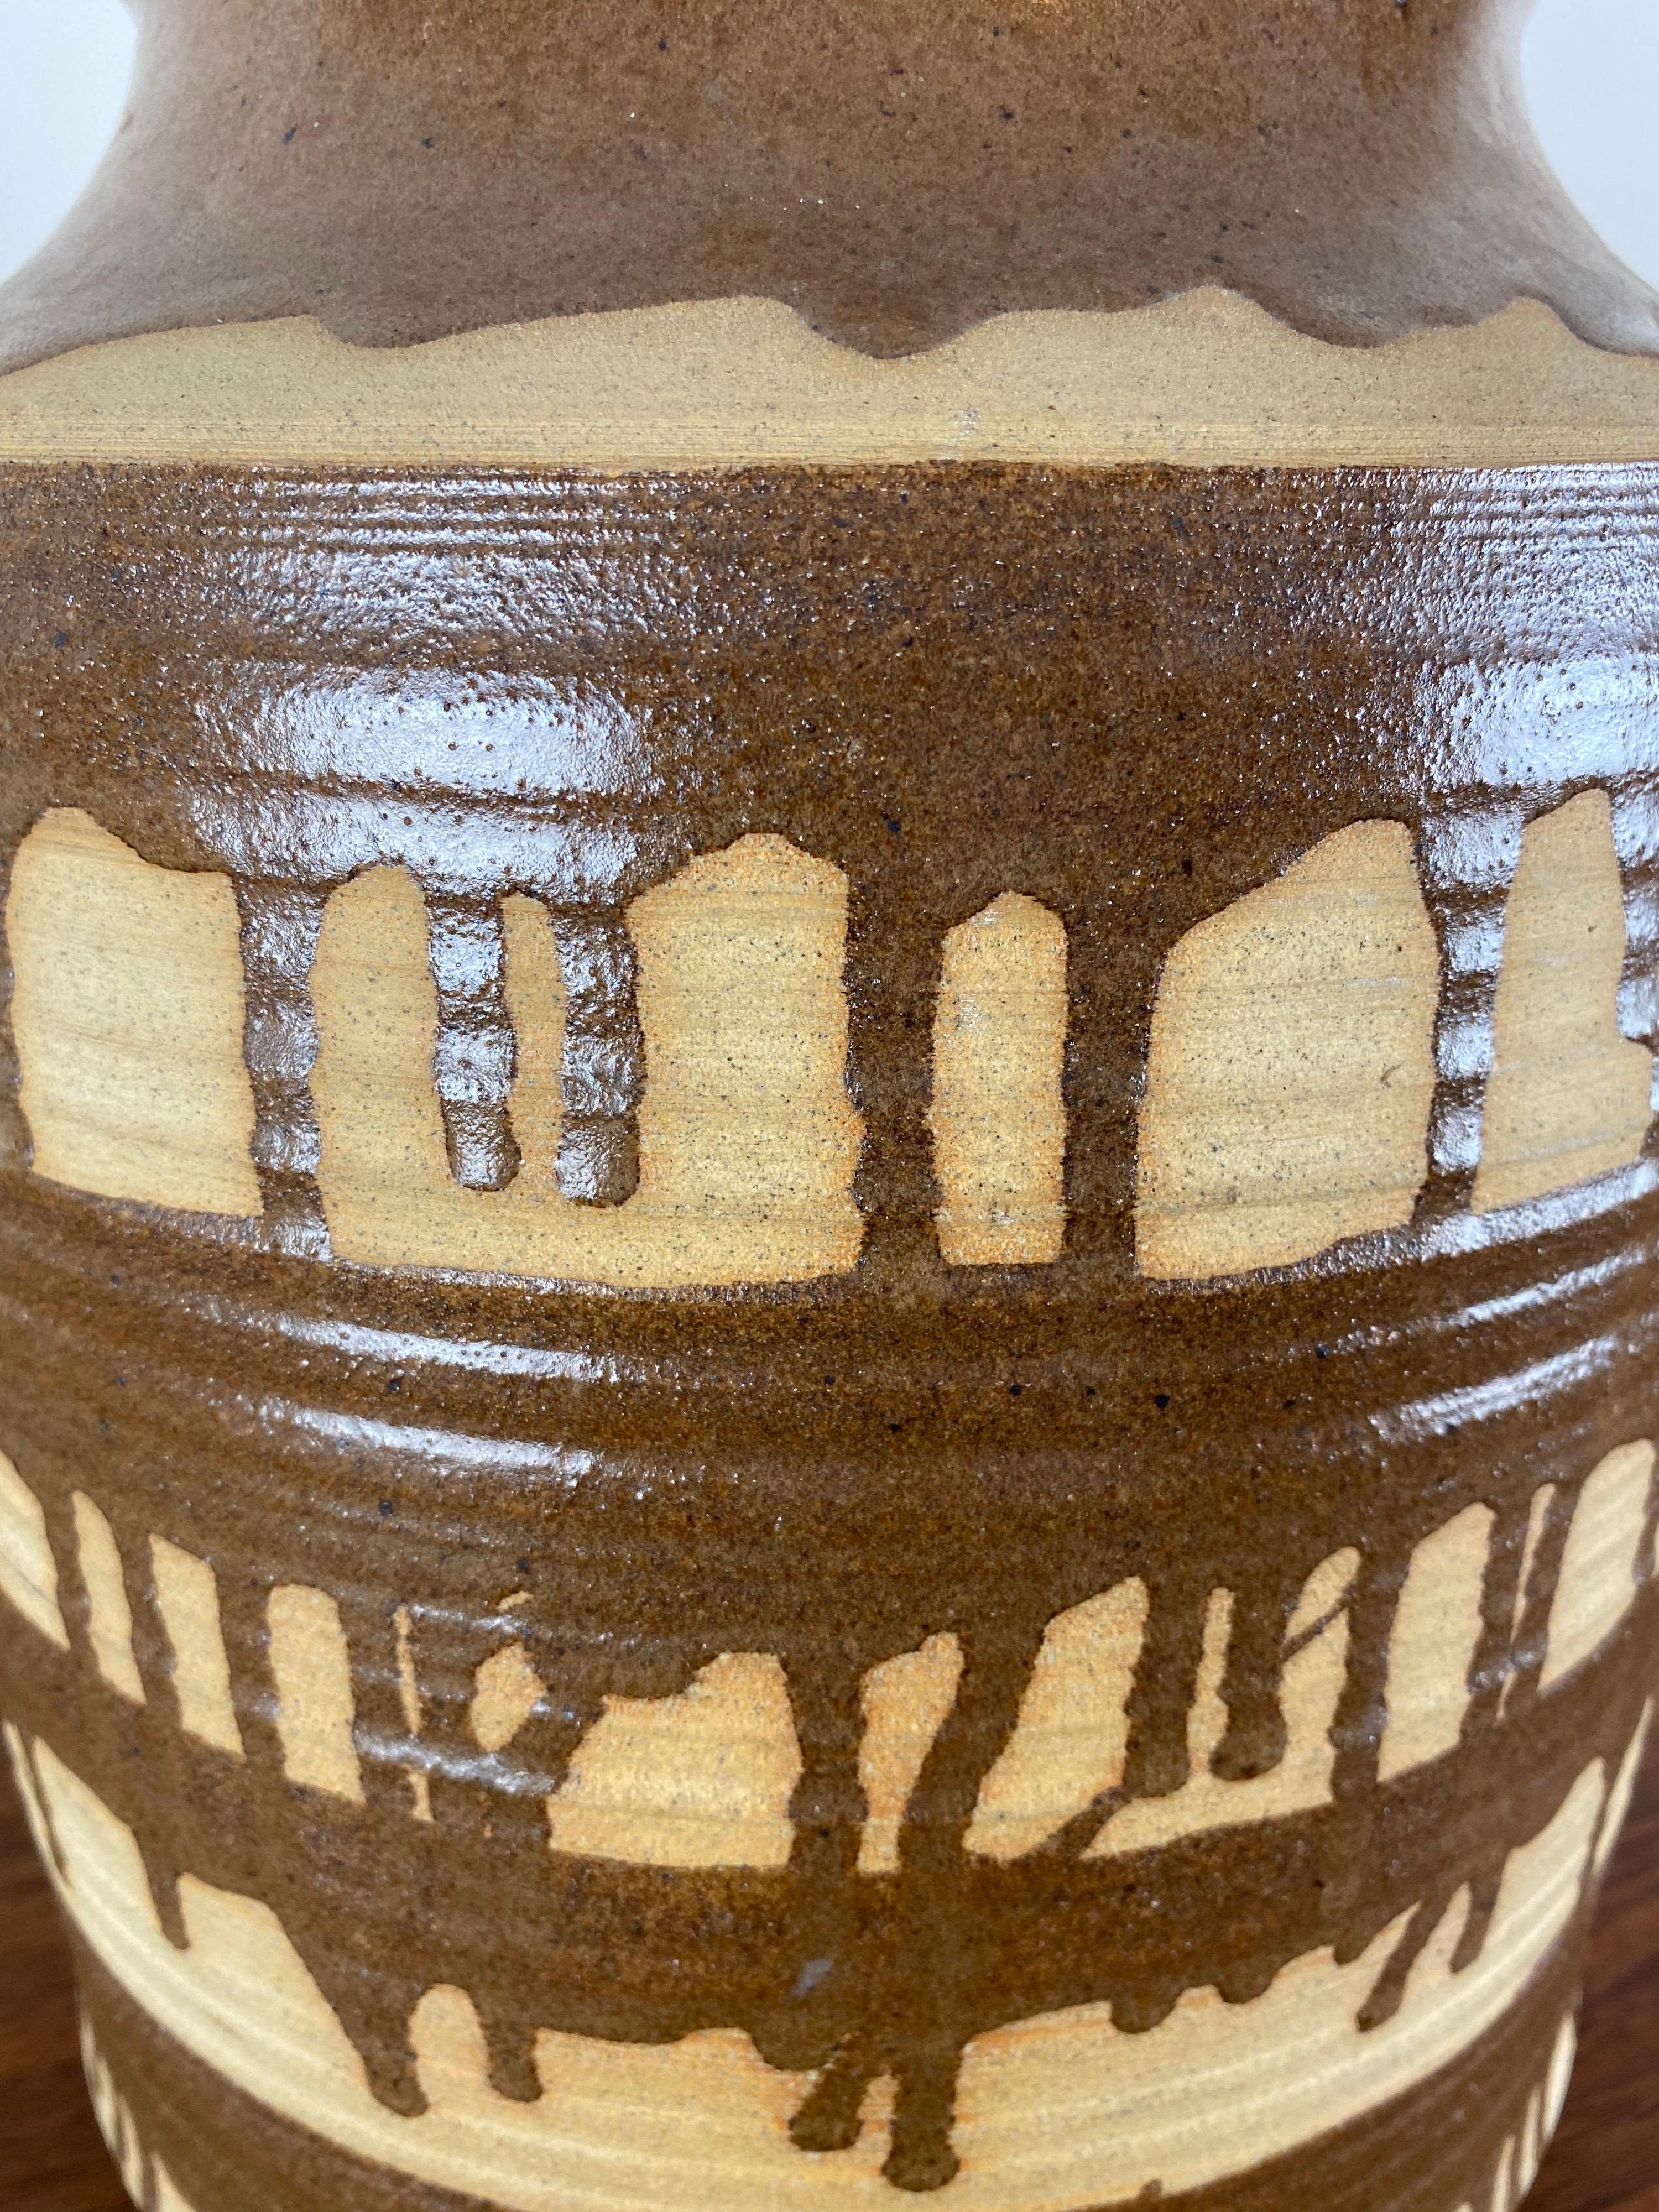 Vintage storage jar or decor crock. Cork lid with abstract striped glaze.

Free shipping.